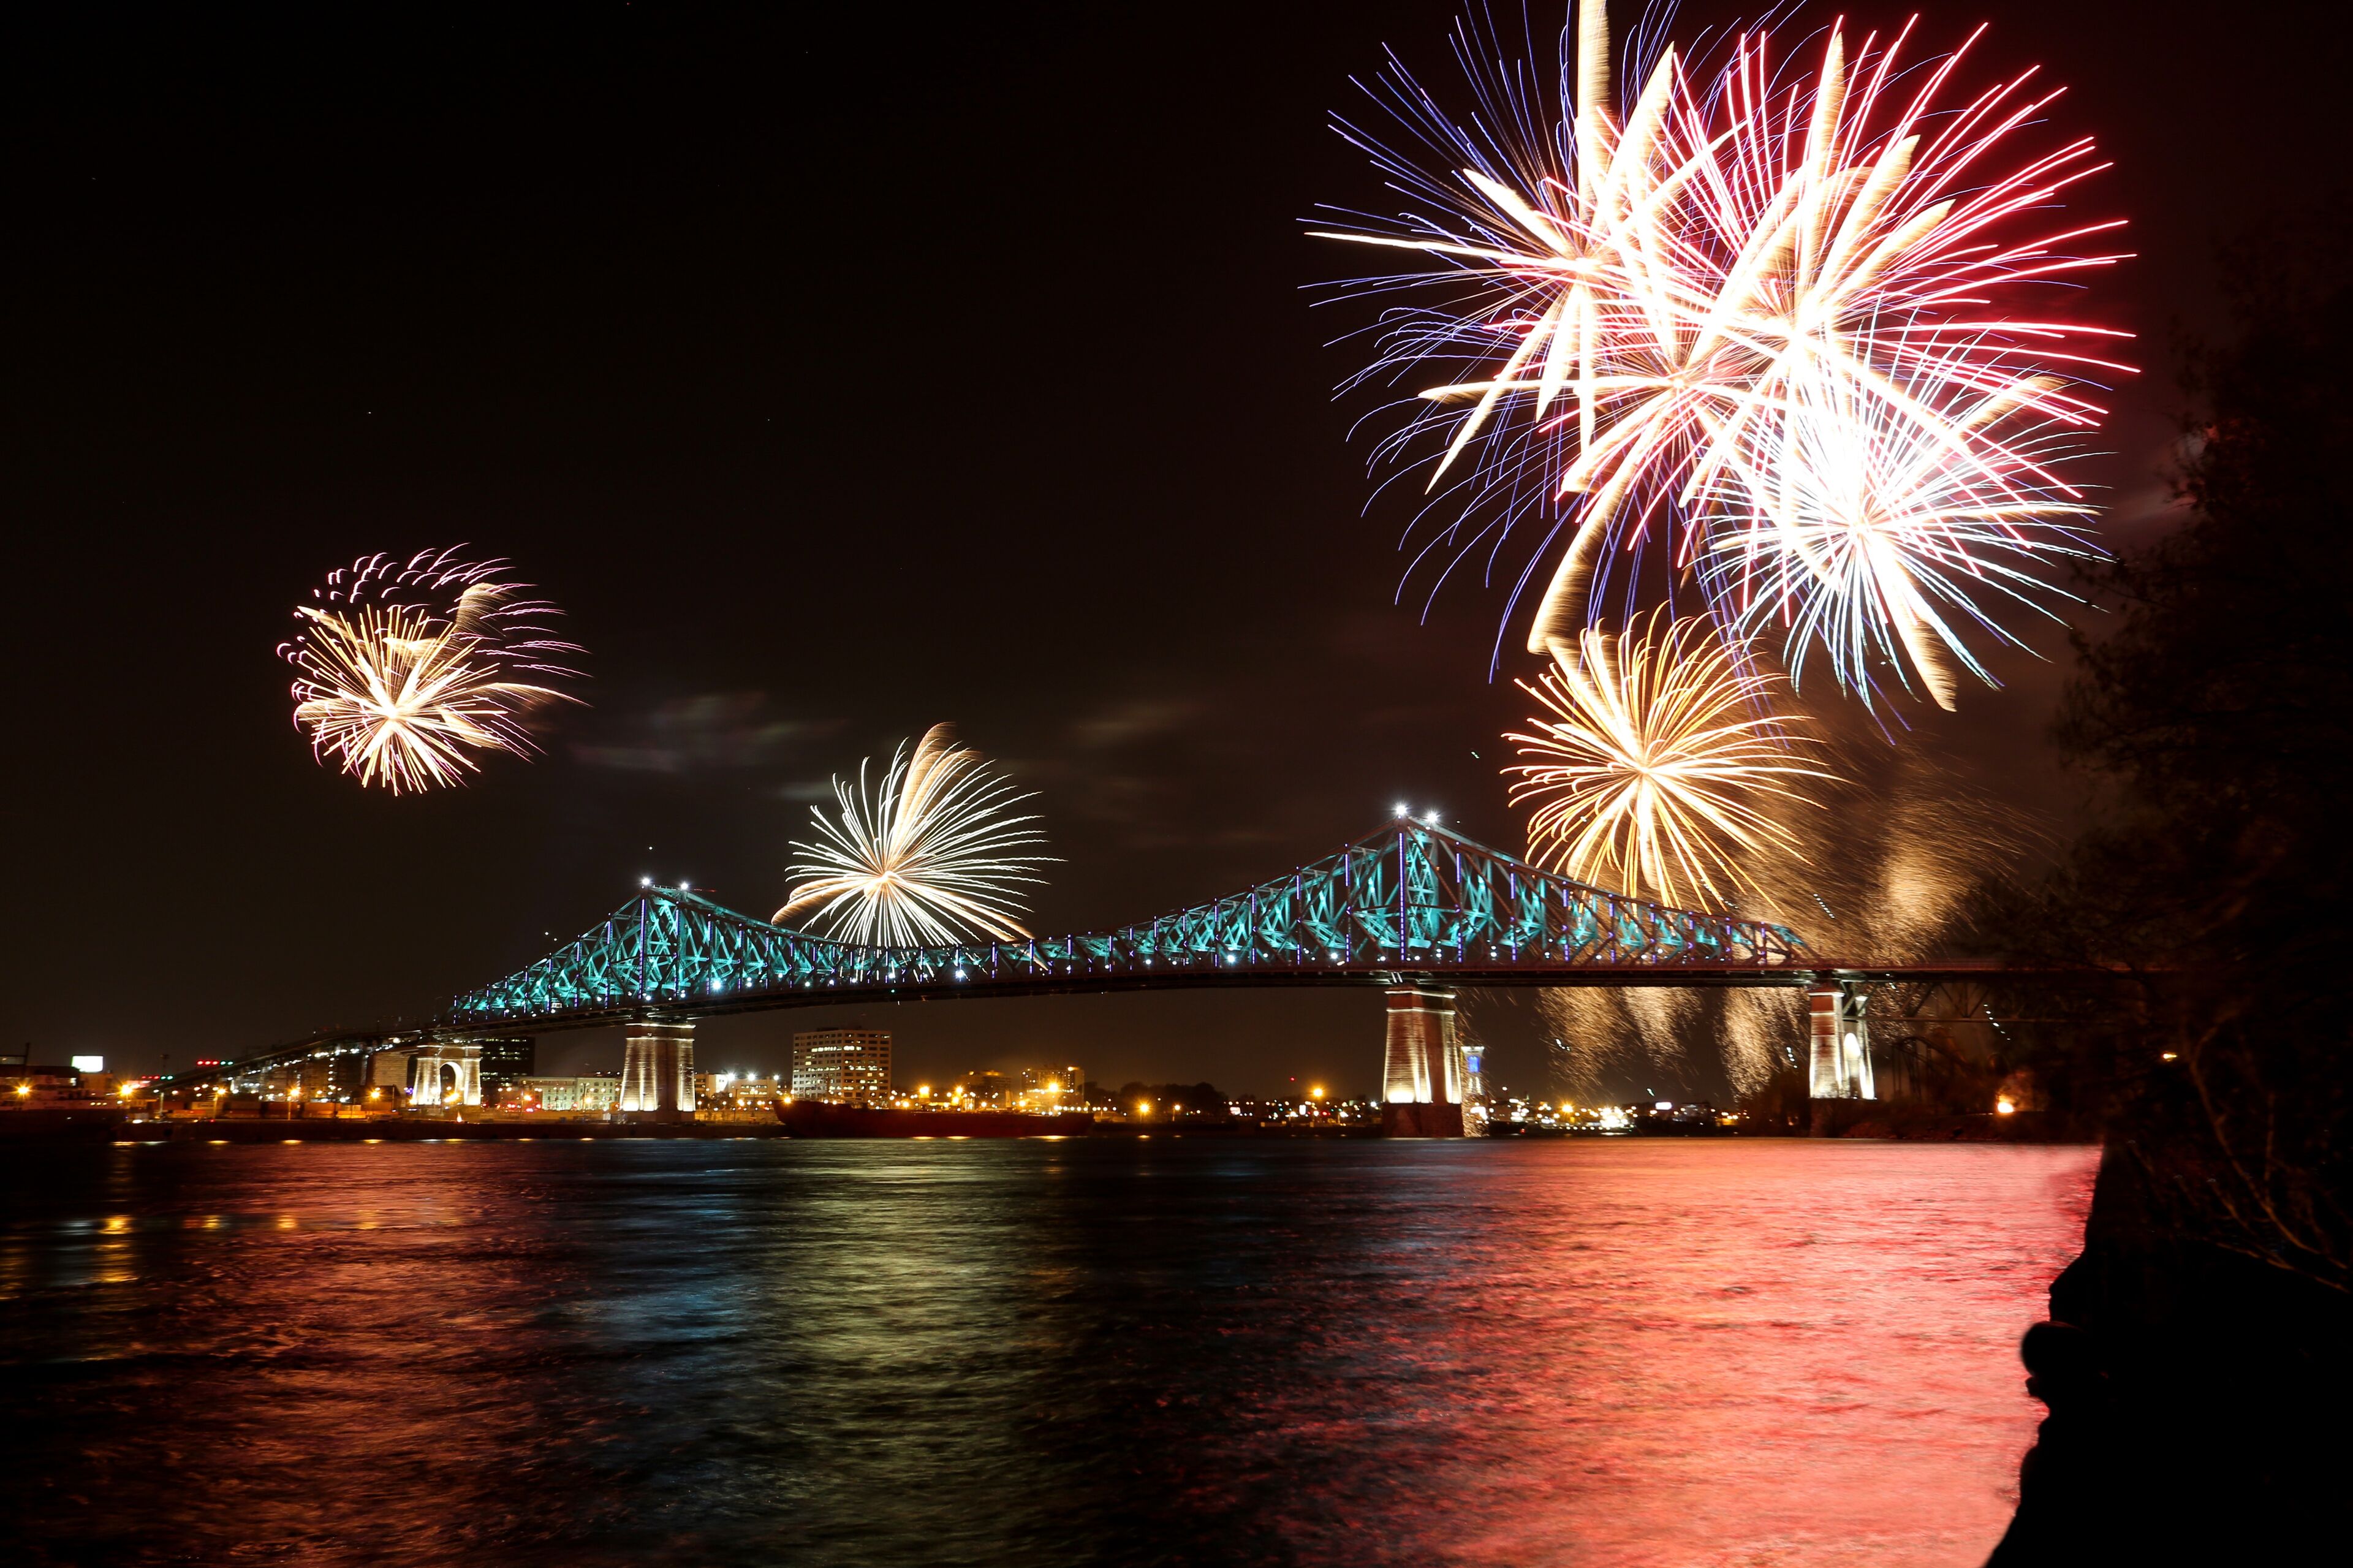 A spectacular fireworks show illuminates the sky above a brightly lit bridge spanning a river at night.